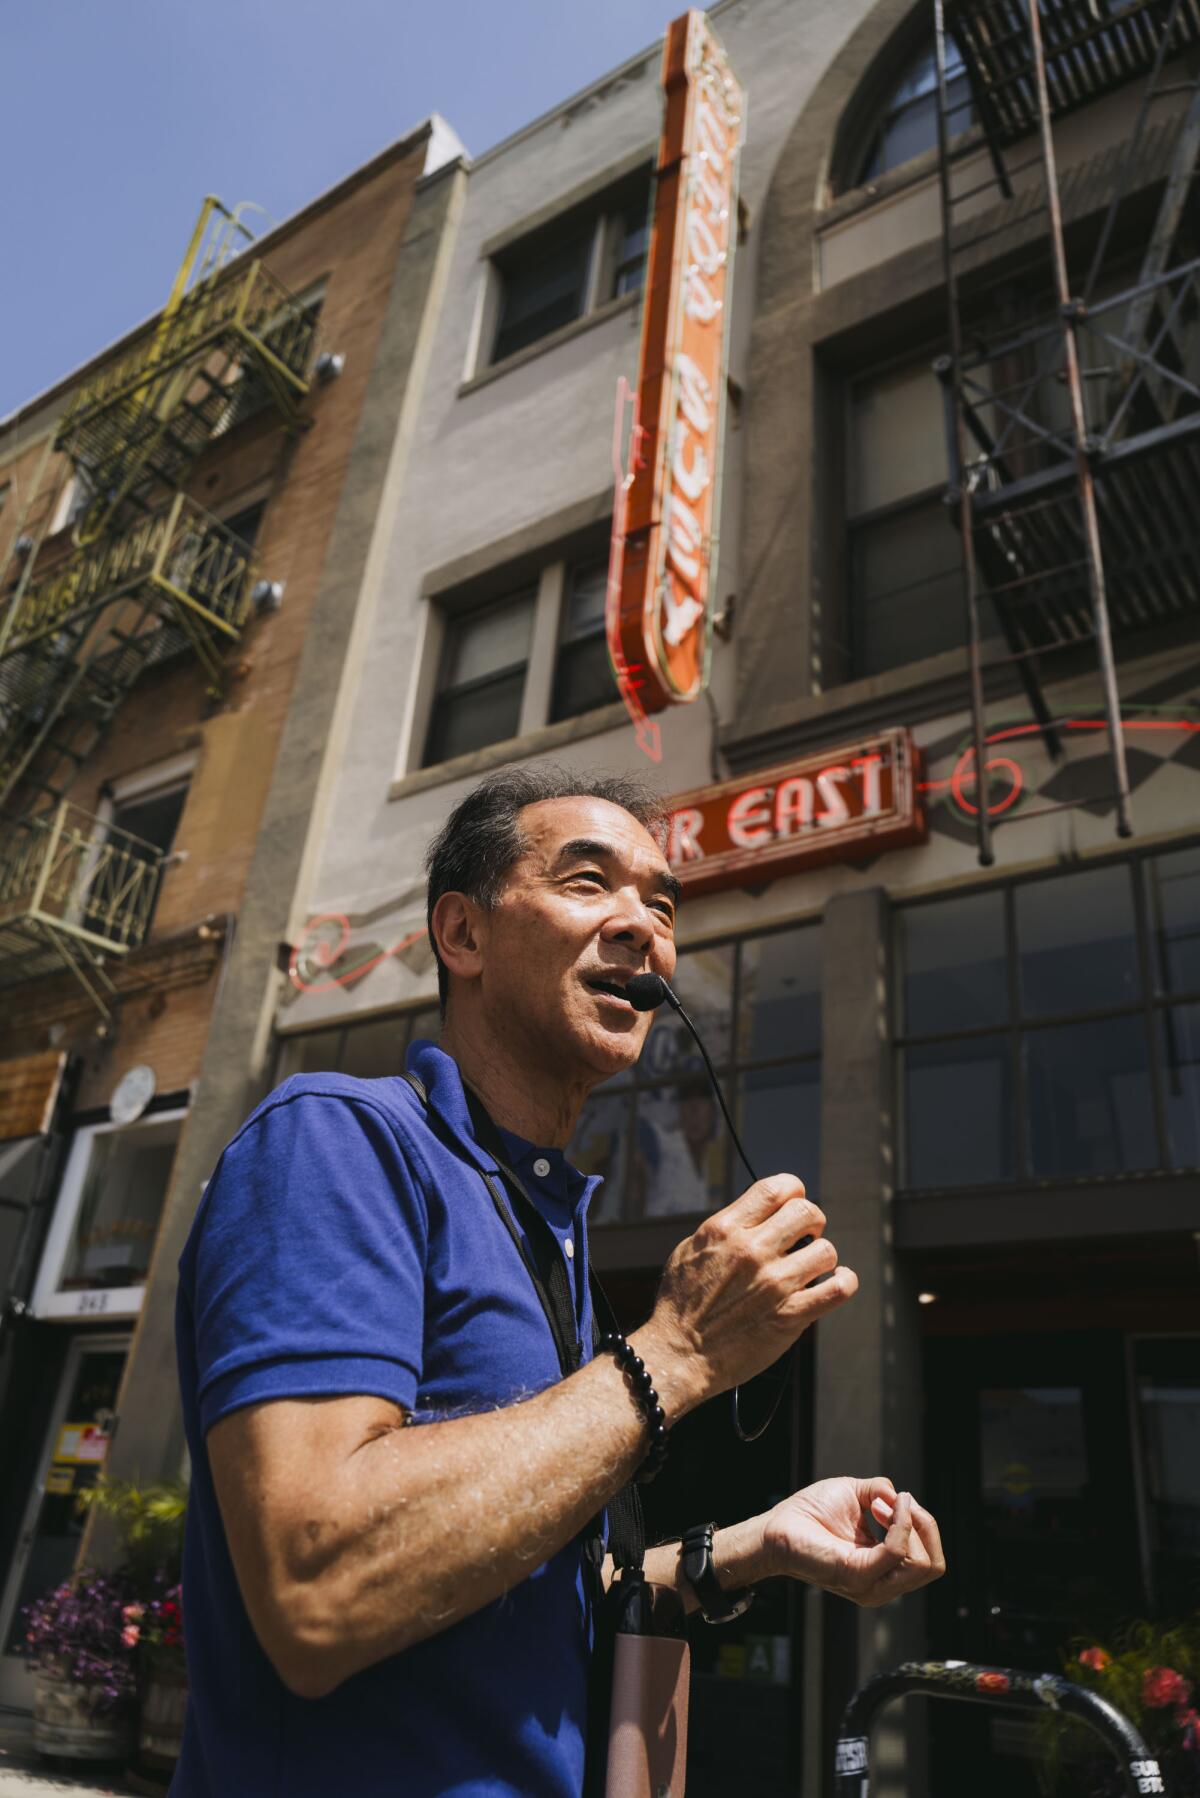 A man with a microphone walks in front of a building with a sign hanging from it.